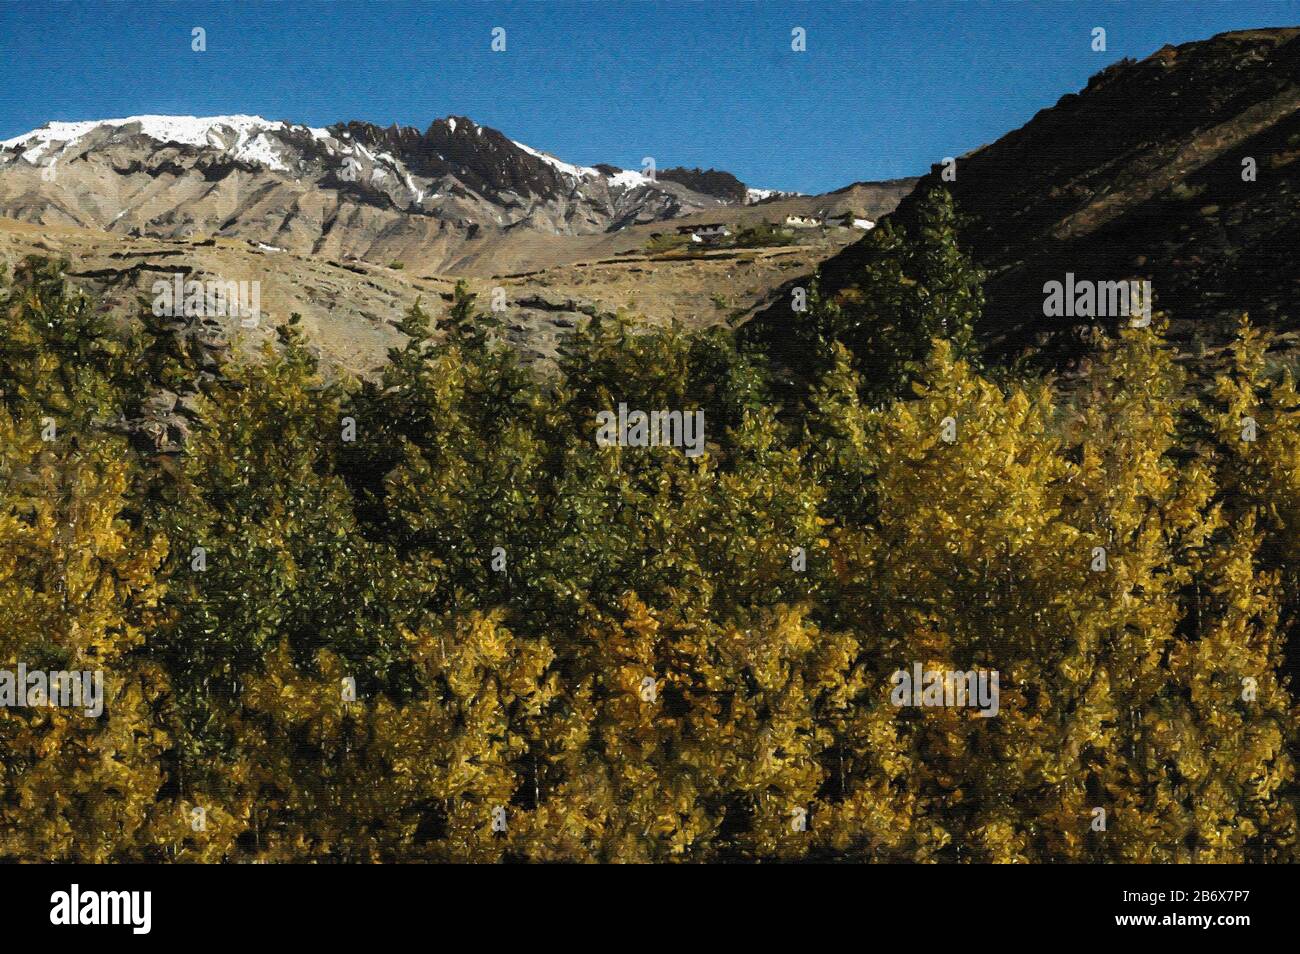 Digital Painting: Pin Valley-0258  Digital Paintings of Beautiful mountain landscapes of Pin Valley located at Lahaul Spiti, Himachal Pradesh, India. Stock Photo